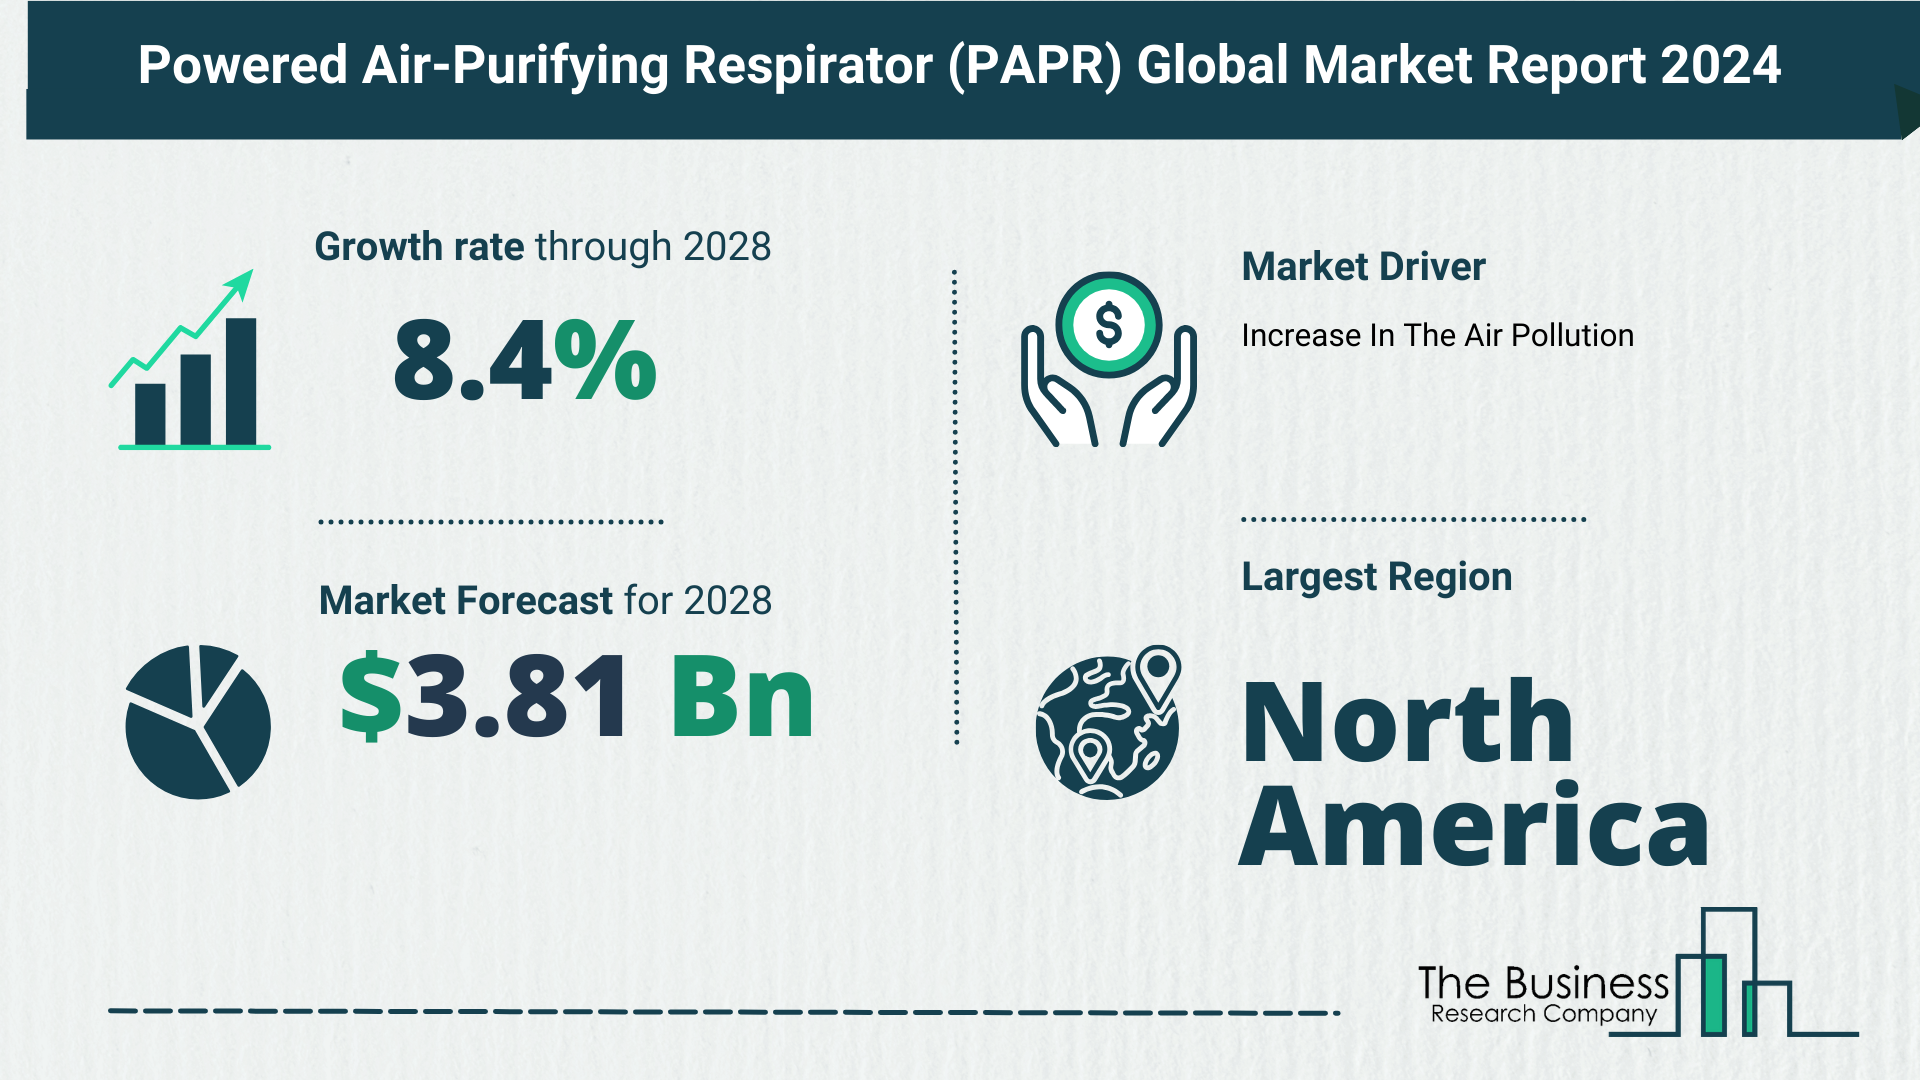 Powered Air-Purifying Respirator (PAPR) Market Forecast 2024: Forecast Market Size, Drivers And Key Segments